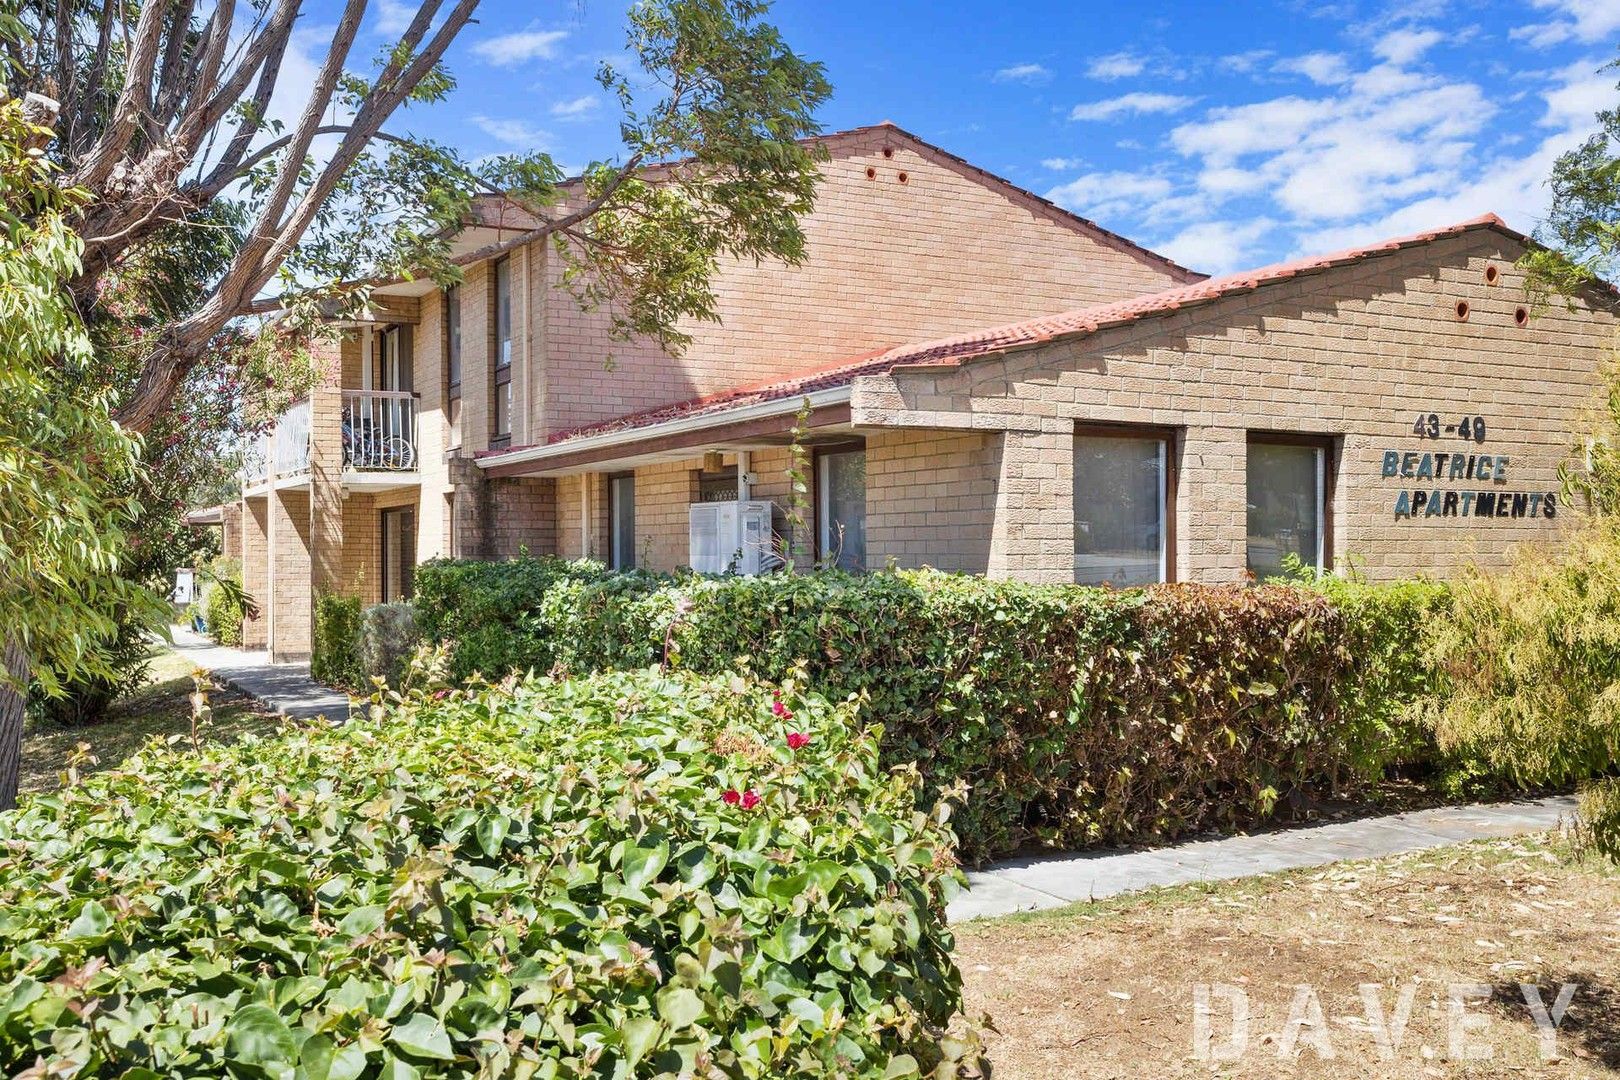 4/43 Beatrice Street, Doubleview WA 6018, Image 0